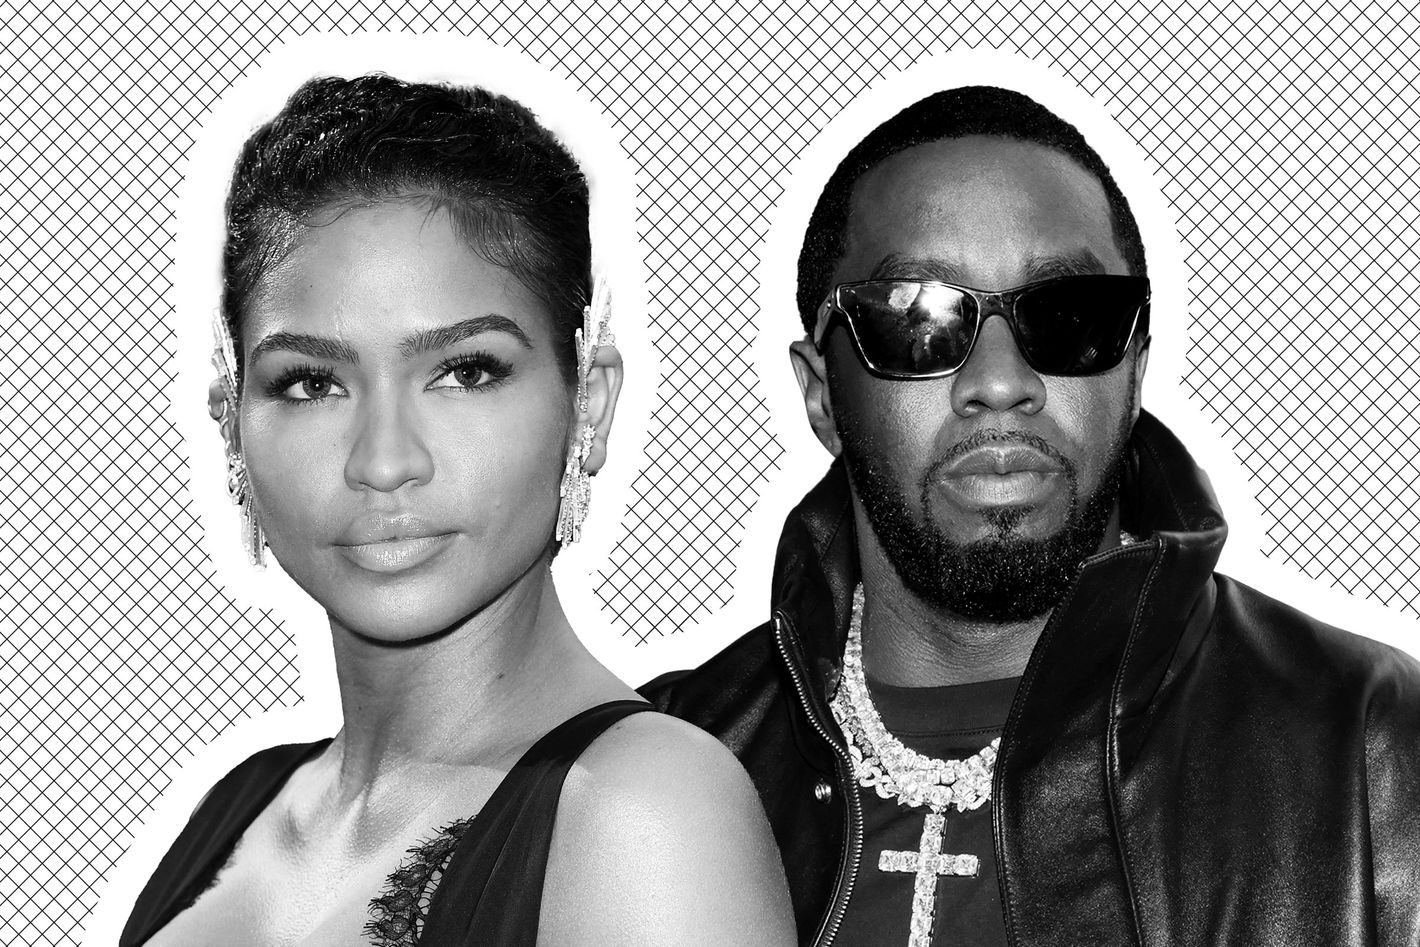 New Video Shows Diddy Assaulting Cassie in 2016